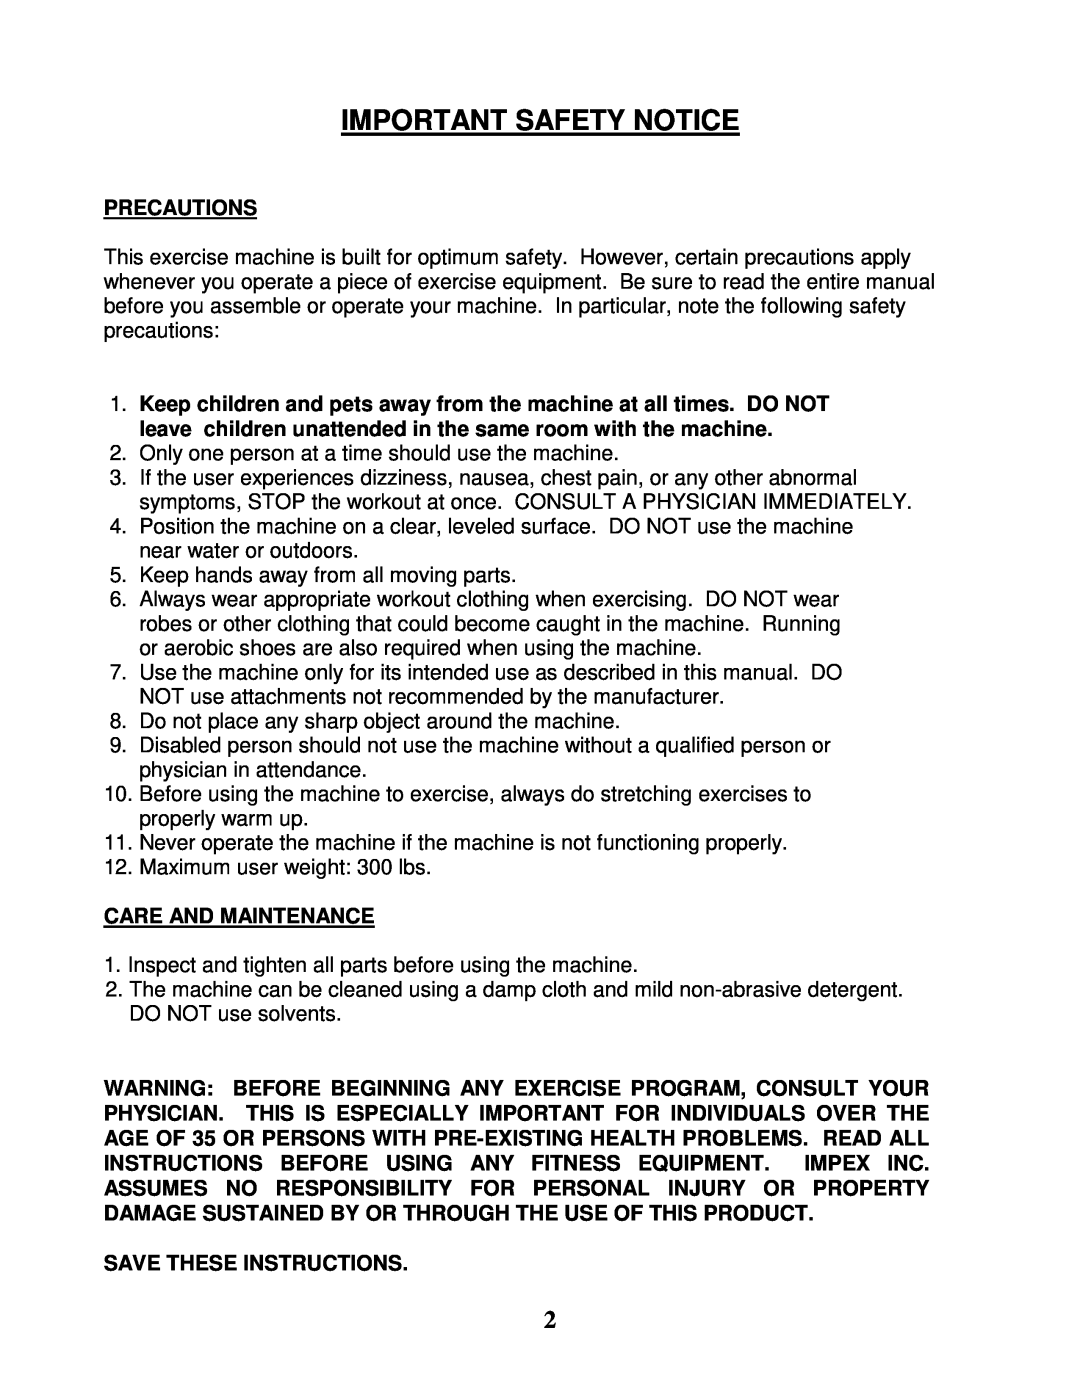 Impex TSA-660 manual Important Safety Notice, Precautions, Care And Maintenance, Save These Instructions 